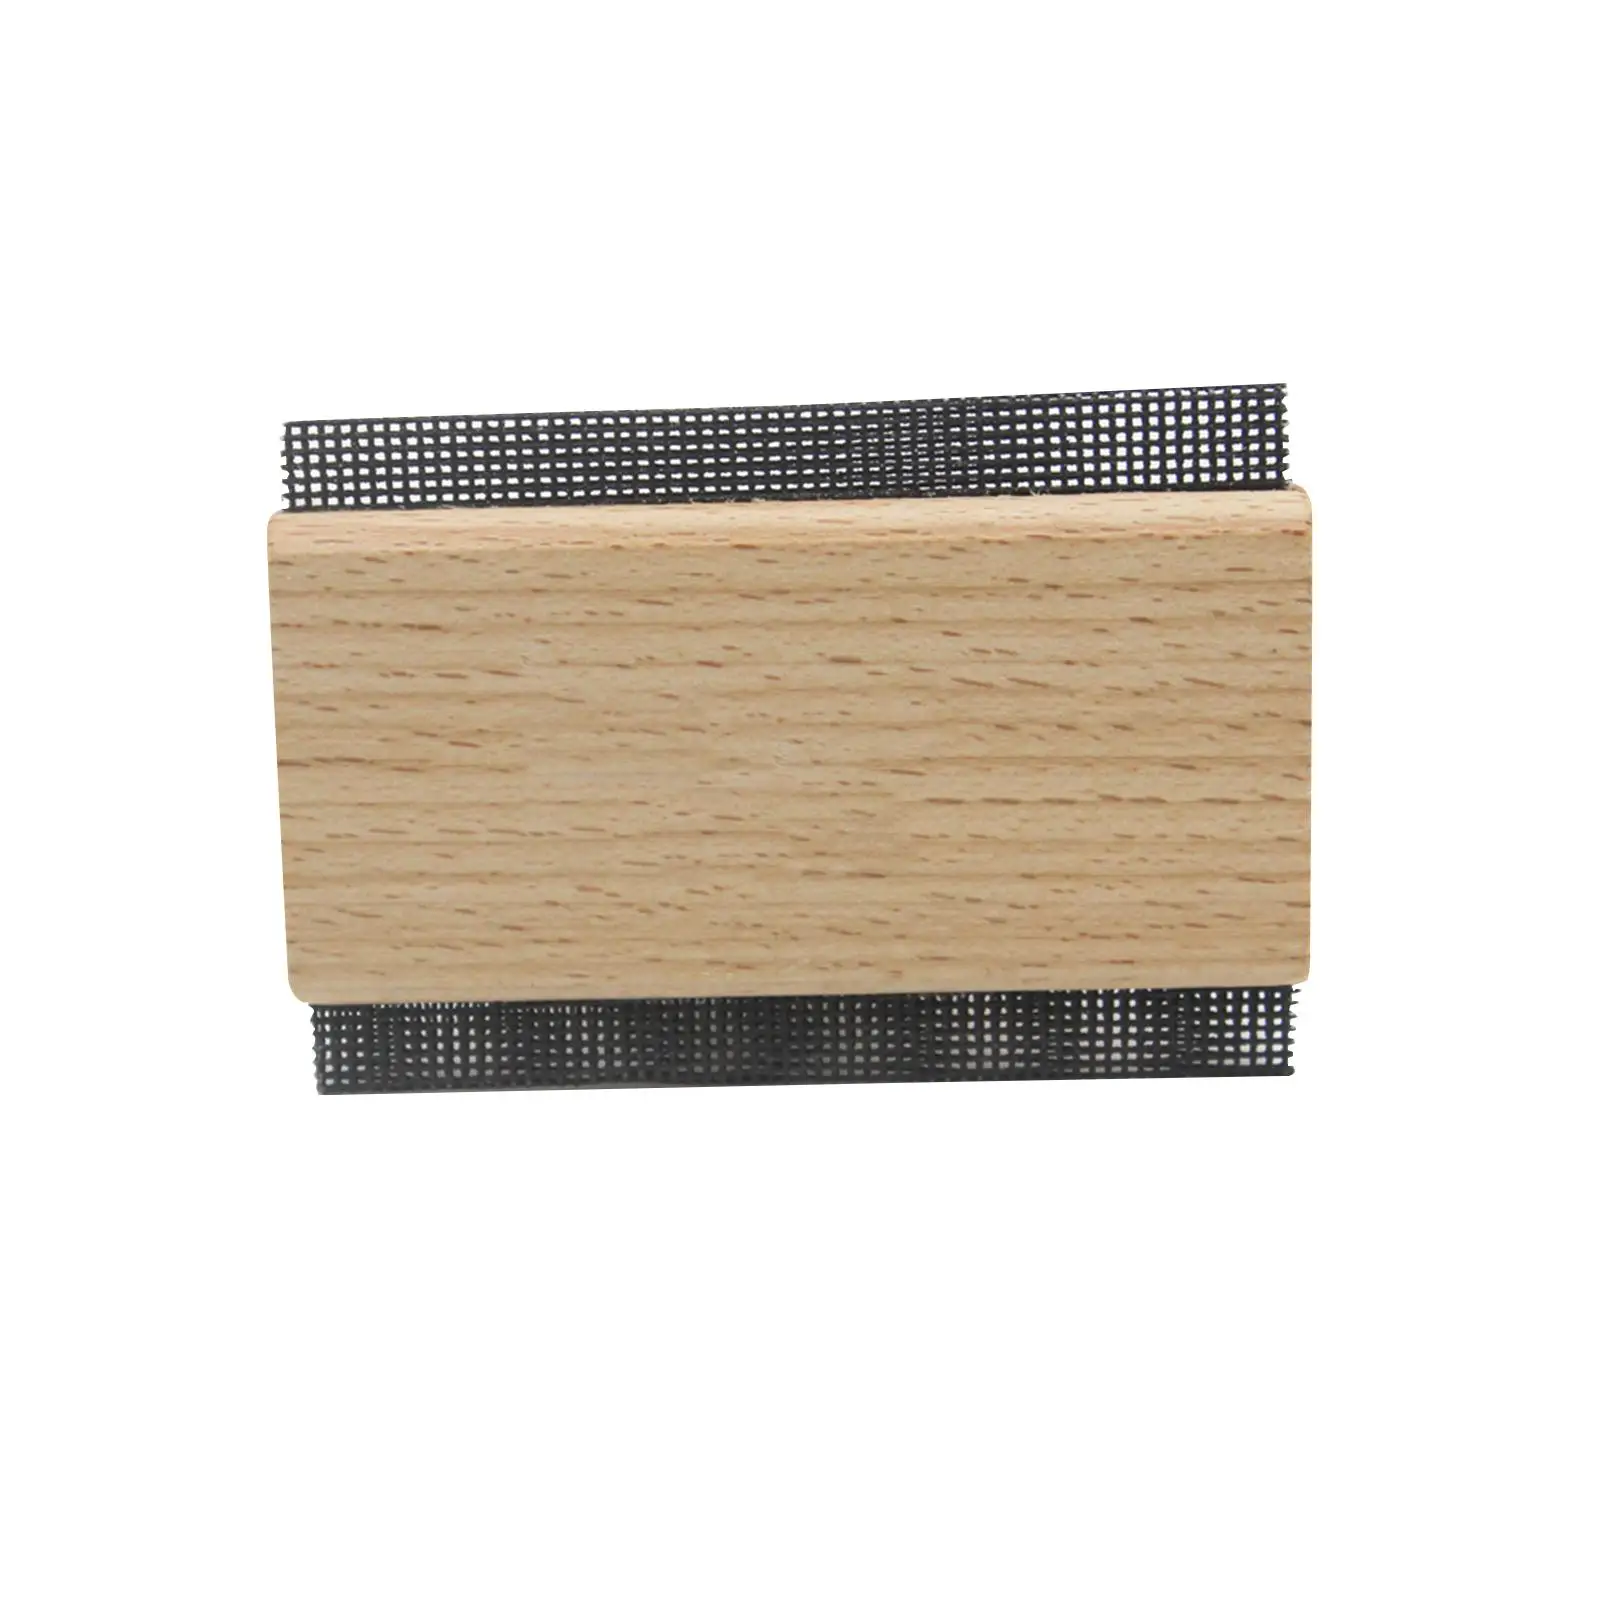 Double Sided Cashmere Comb Cleaner to Remove Pilling Fuzz Manual Wool Comb